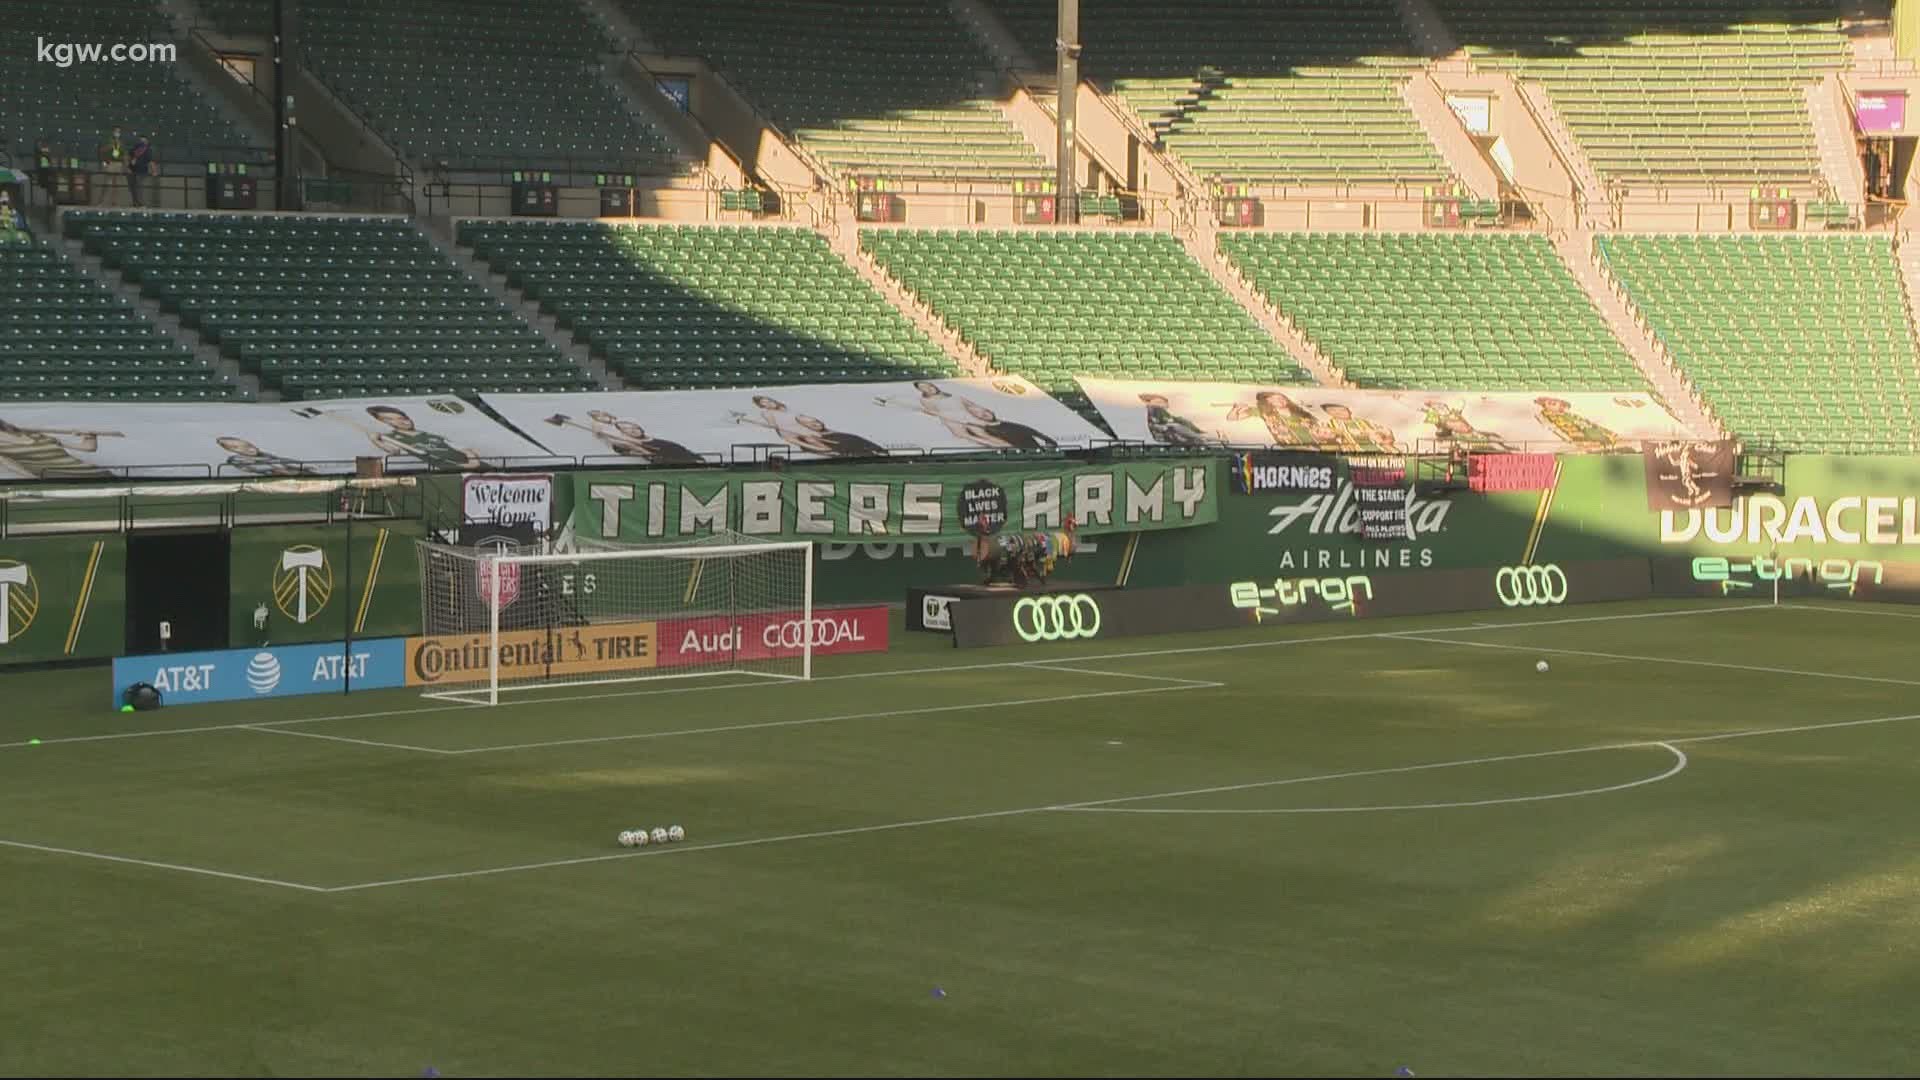 The Sunday night game was the Timbers' first home game since before the pandemic, and a lot of changes were made to make that happen